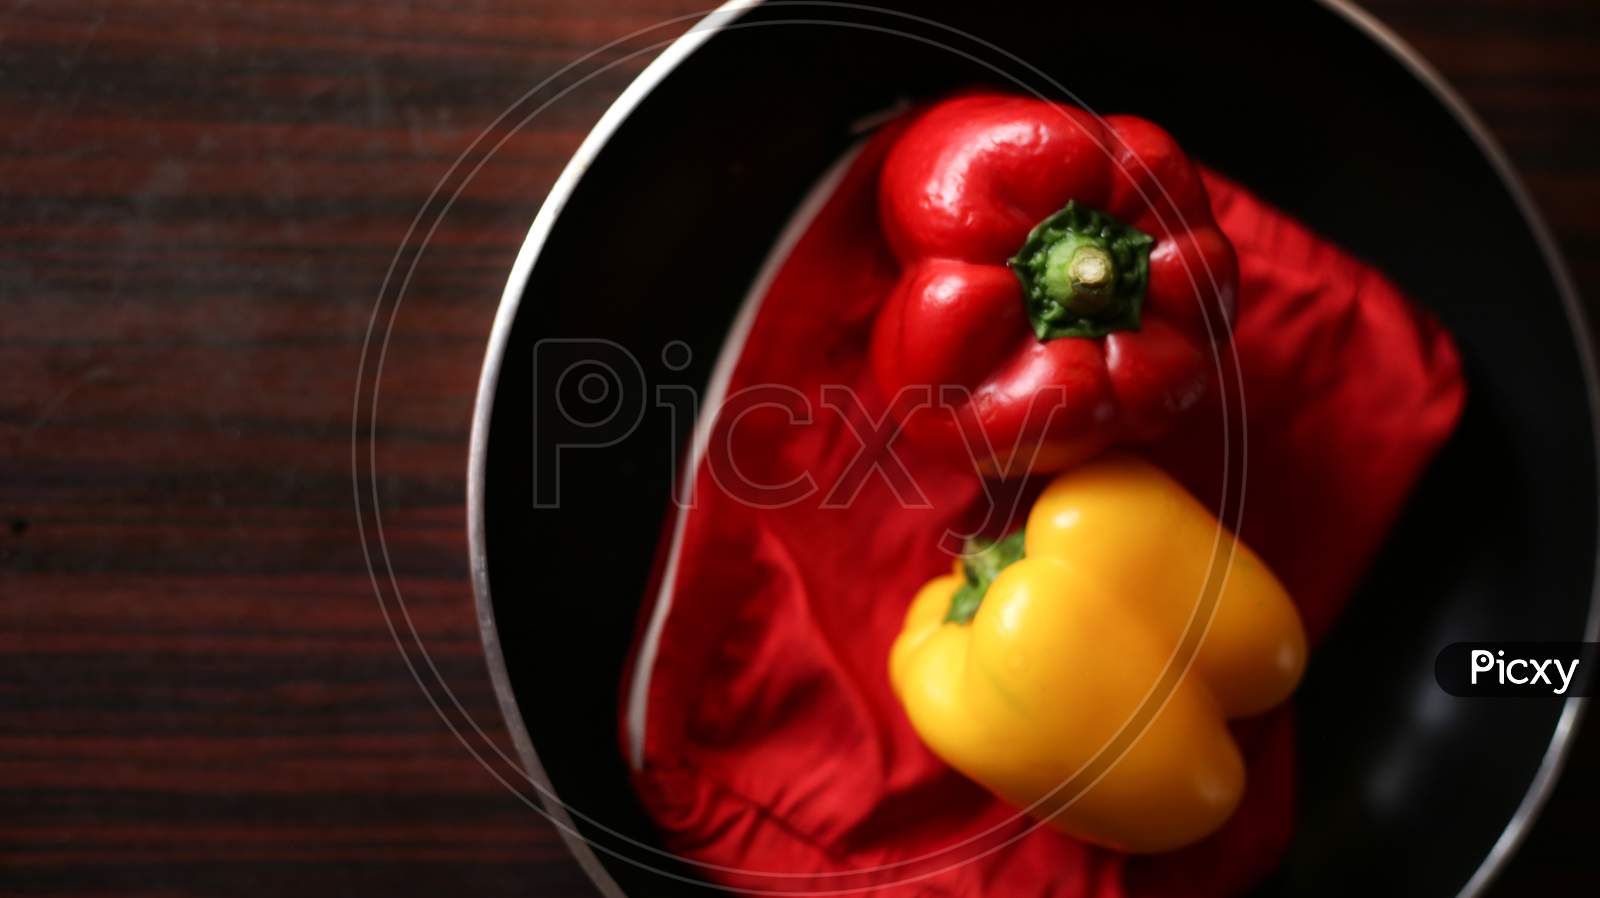 Closeup View Of Red And Yellow Color Bell Peppers In Cooking Pan With Wooden Background